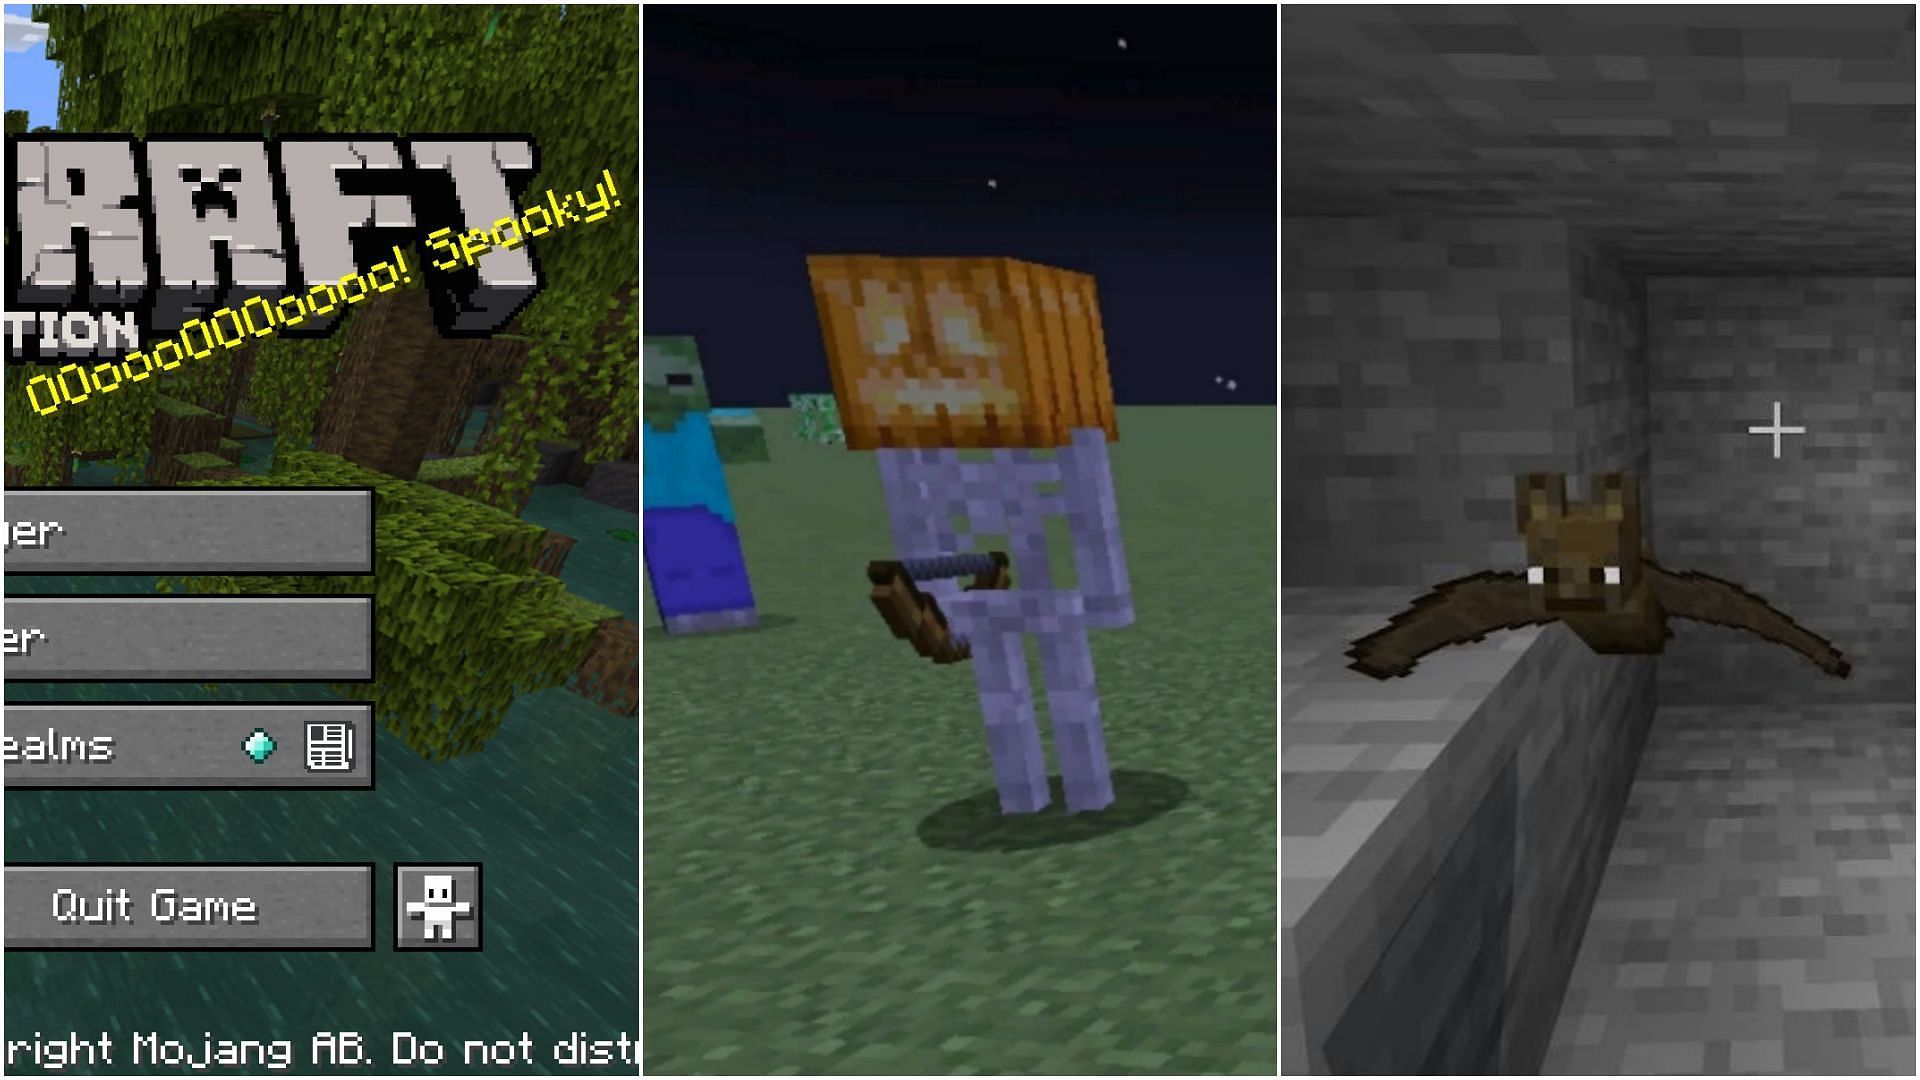 All these features activate in Minecraft Java Edition for a limited period of time during Halloween (Image via Sportskeeda)